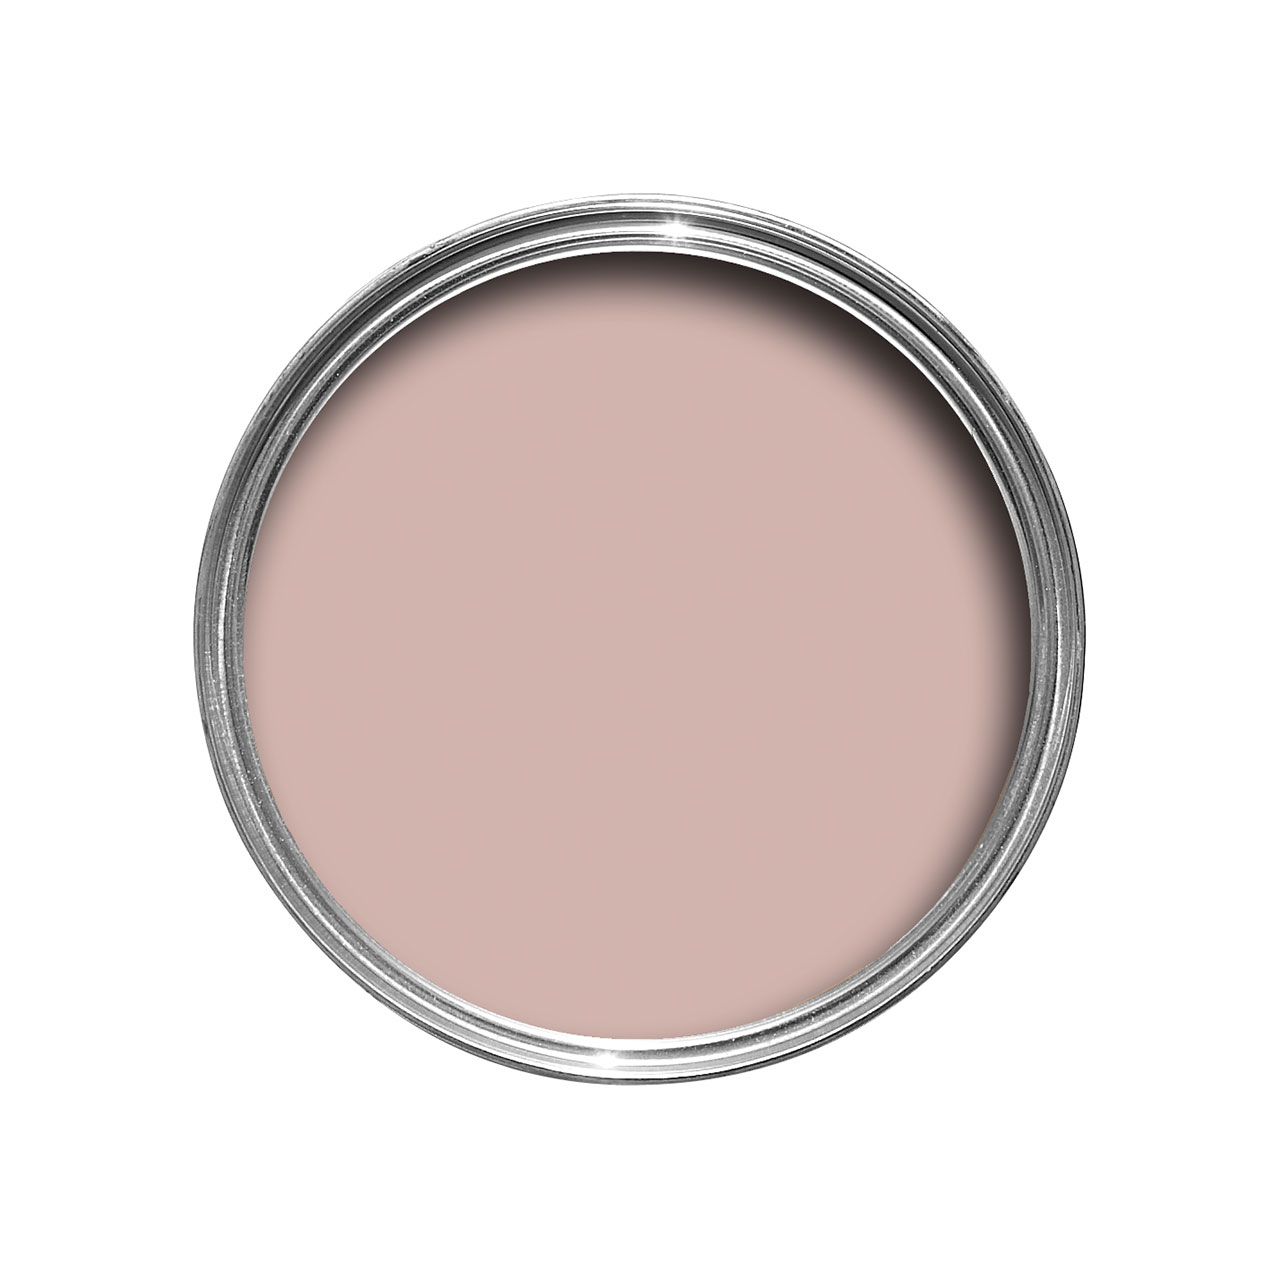 Archive Collection: Pink Drab (207)